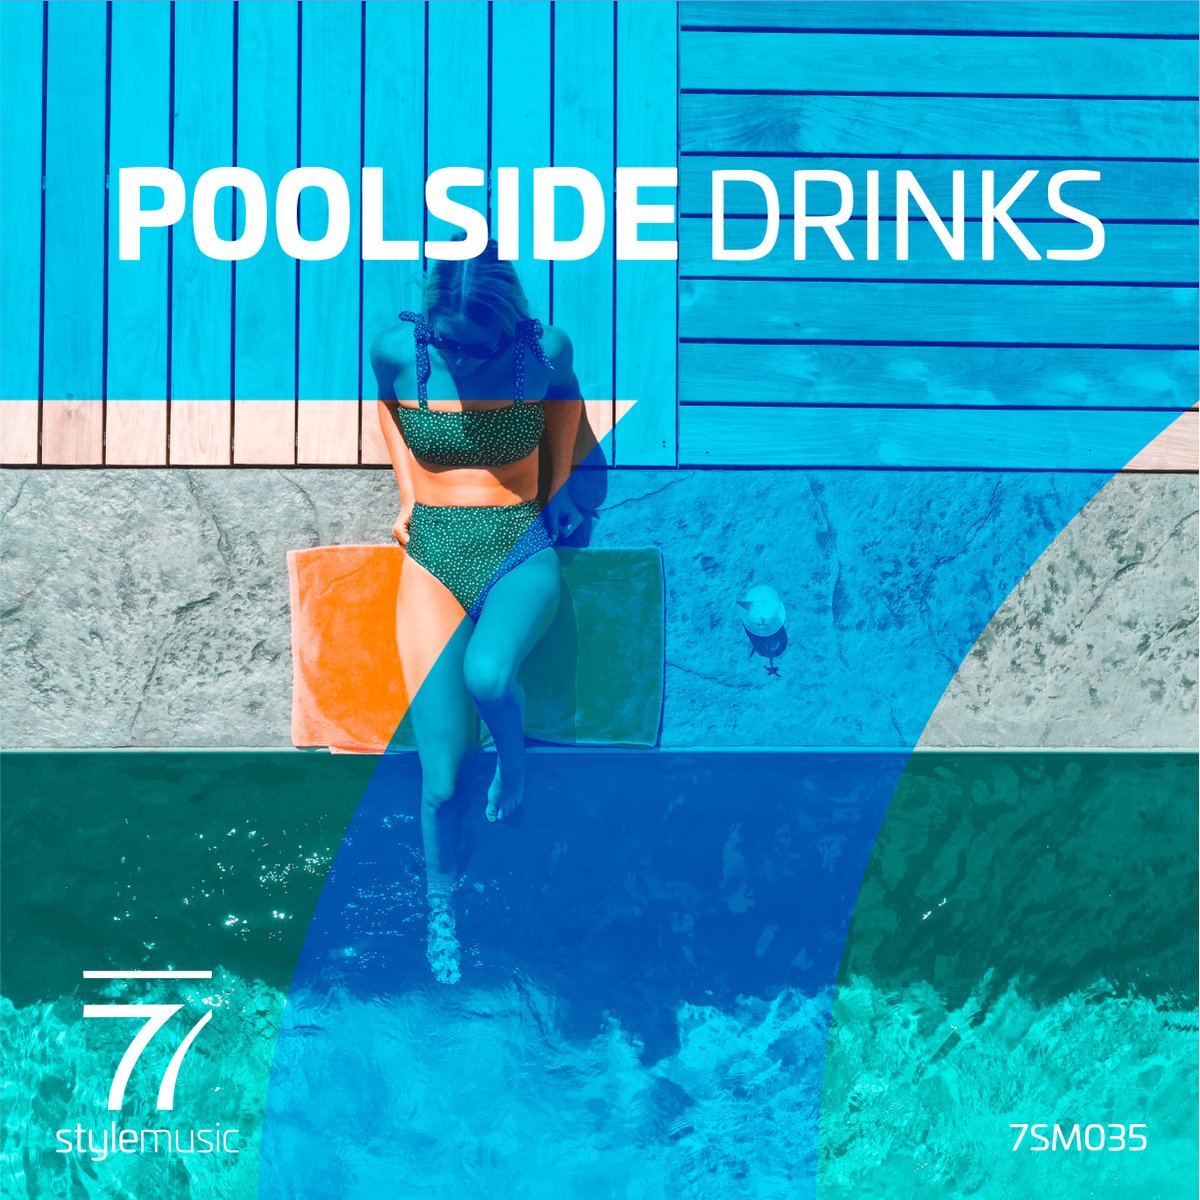 NEW YEAR NEW MUSIC 'Poolside Drinks' is our first release of 2023, it maybe the beginning of the year but these tracks ooze lying in the sun, enjoying a cold drink!  
Now @ 7StyleMusic.com #productionmusic #librarymusic #producer #tvproducer #radioproducers